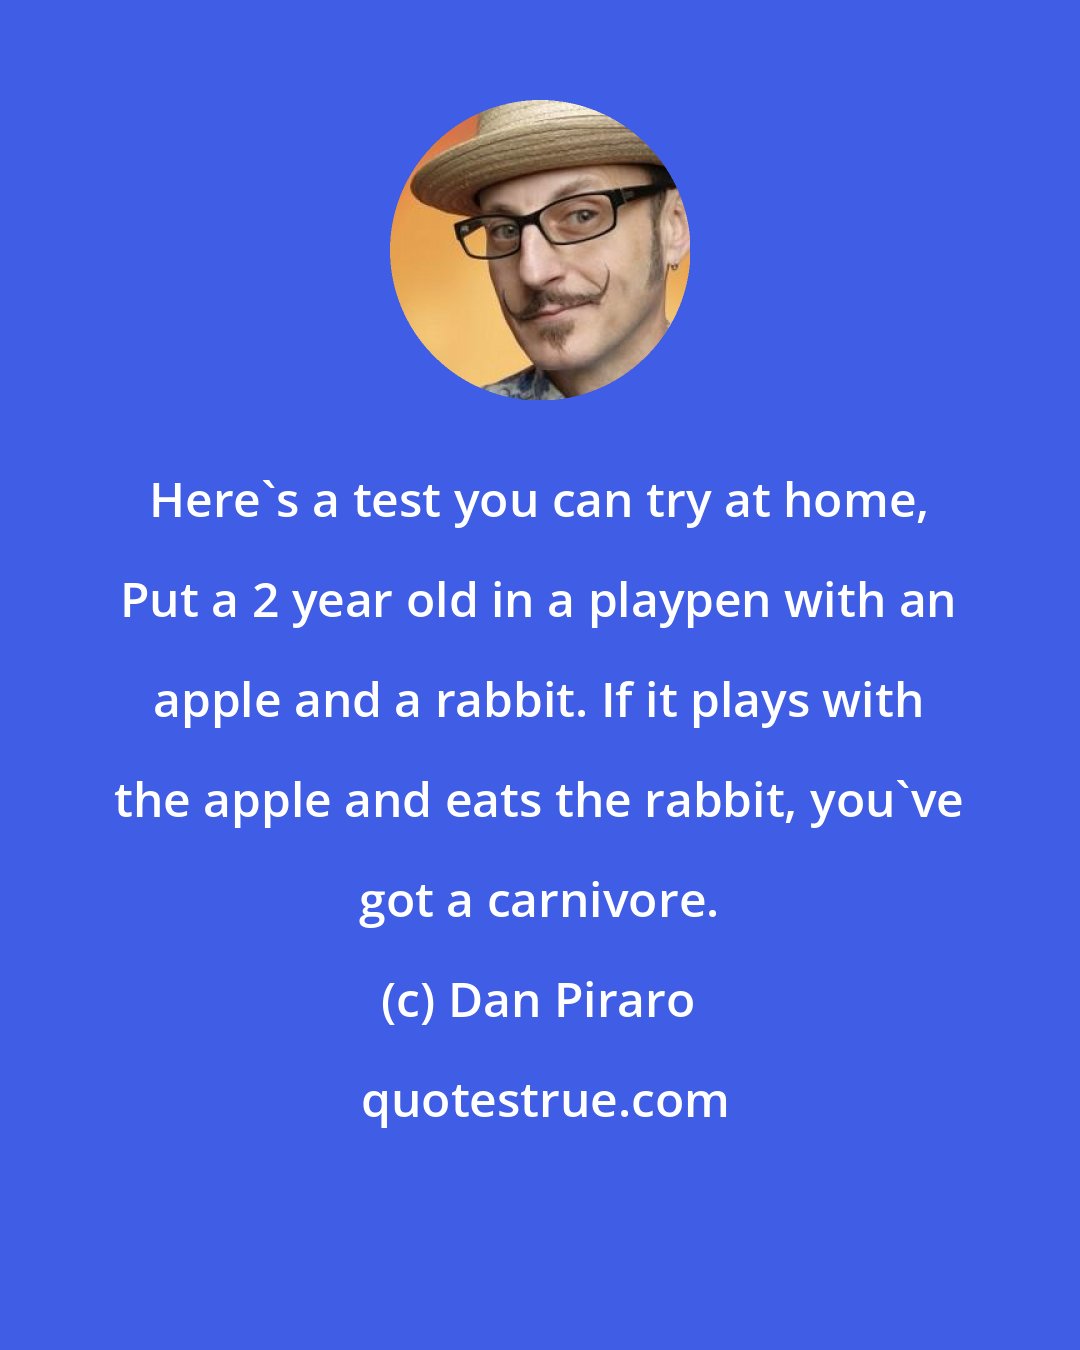 Dan Piraro: Here's a test you can try at home, Put a 2 year old in a playpen with an apple and a rabbit. If it plays with the apple and eats the rabbit, you've got a carnivore.